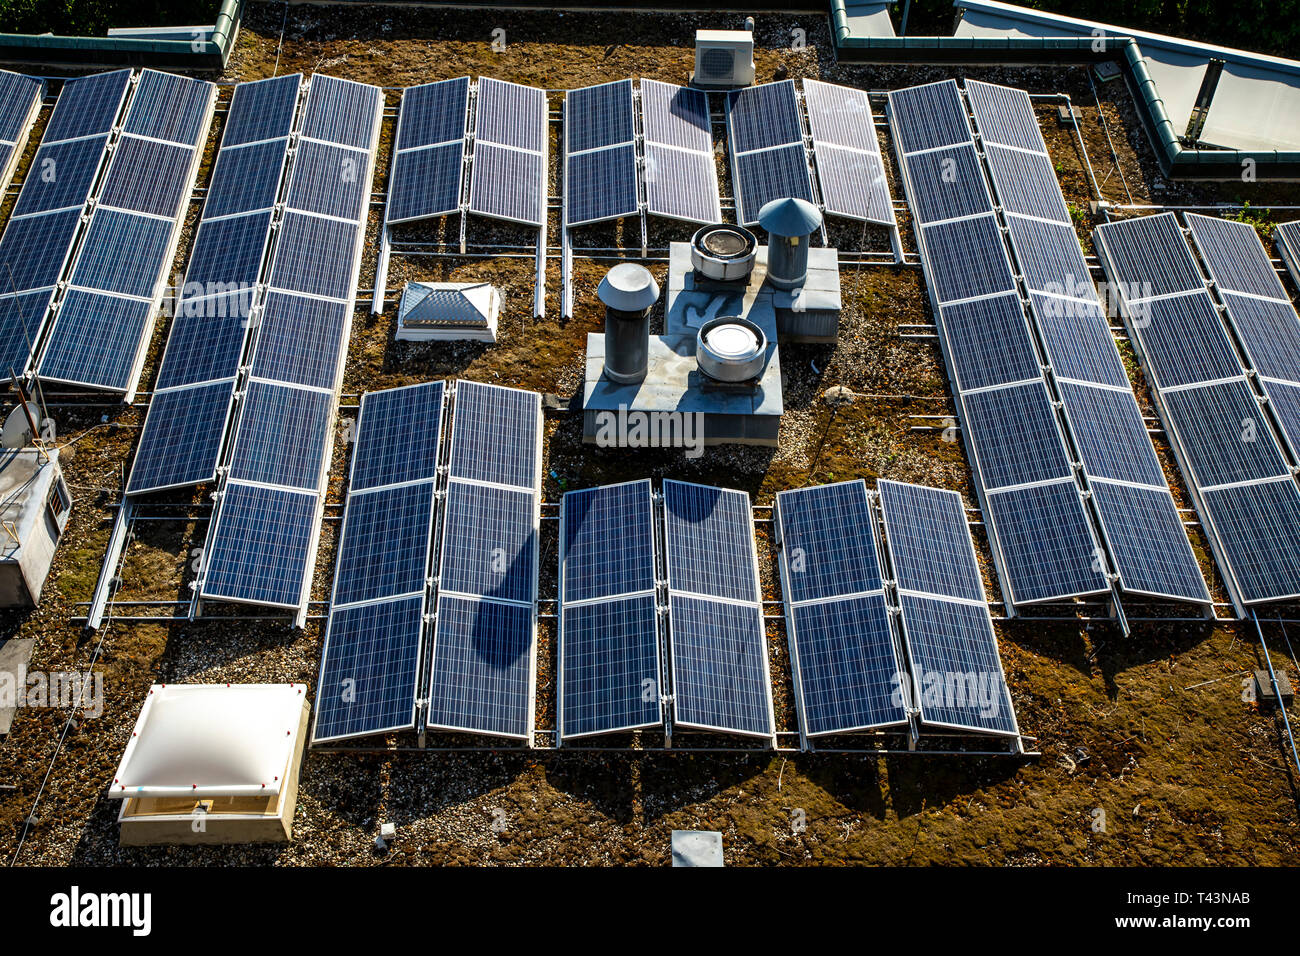 Solar systems, photovoltaic modules, on a flat roof, solar energy, Stock Photo